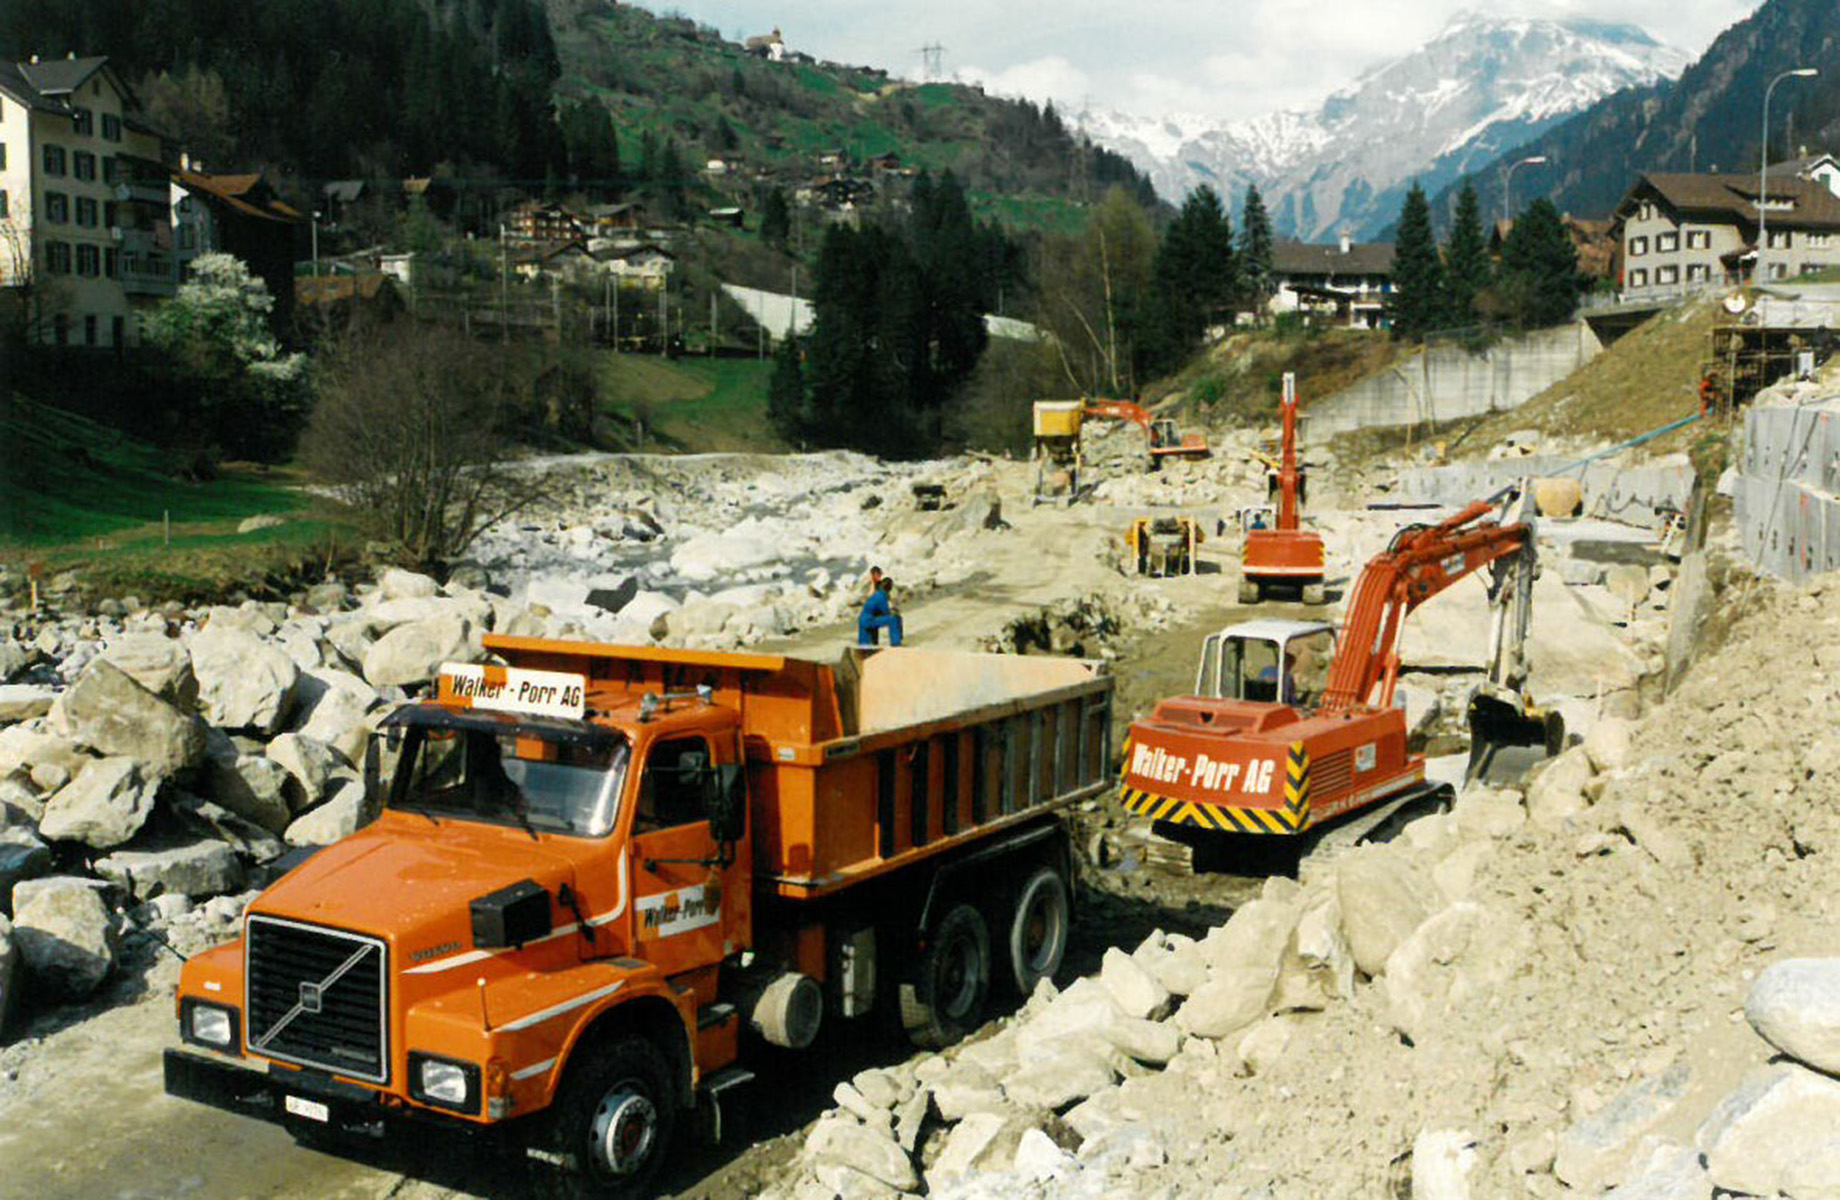 Photo: historic picture of an underground construction site with excavators and trucks in front of a forested mountain landscape